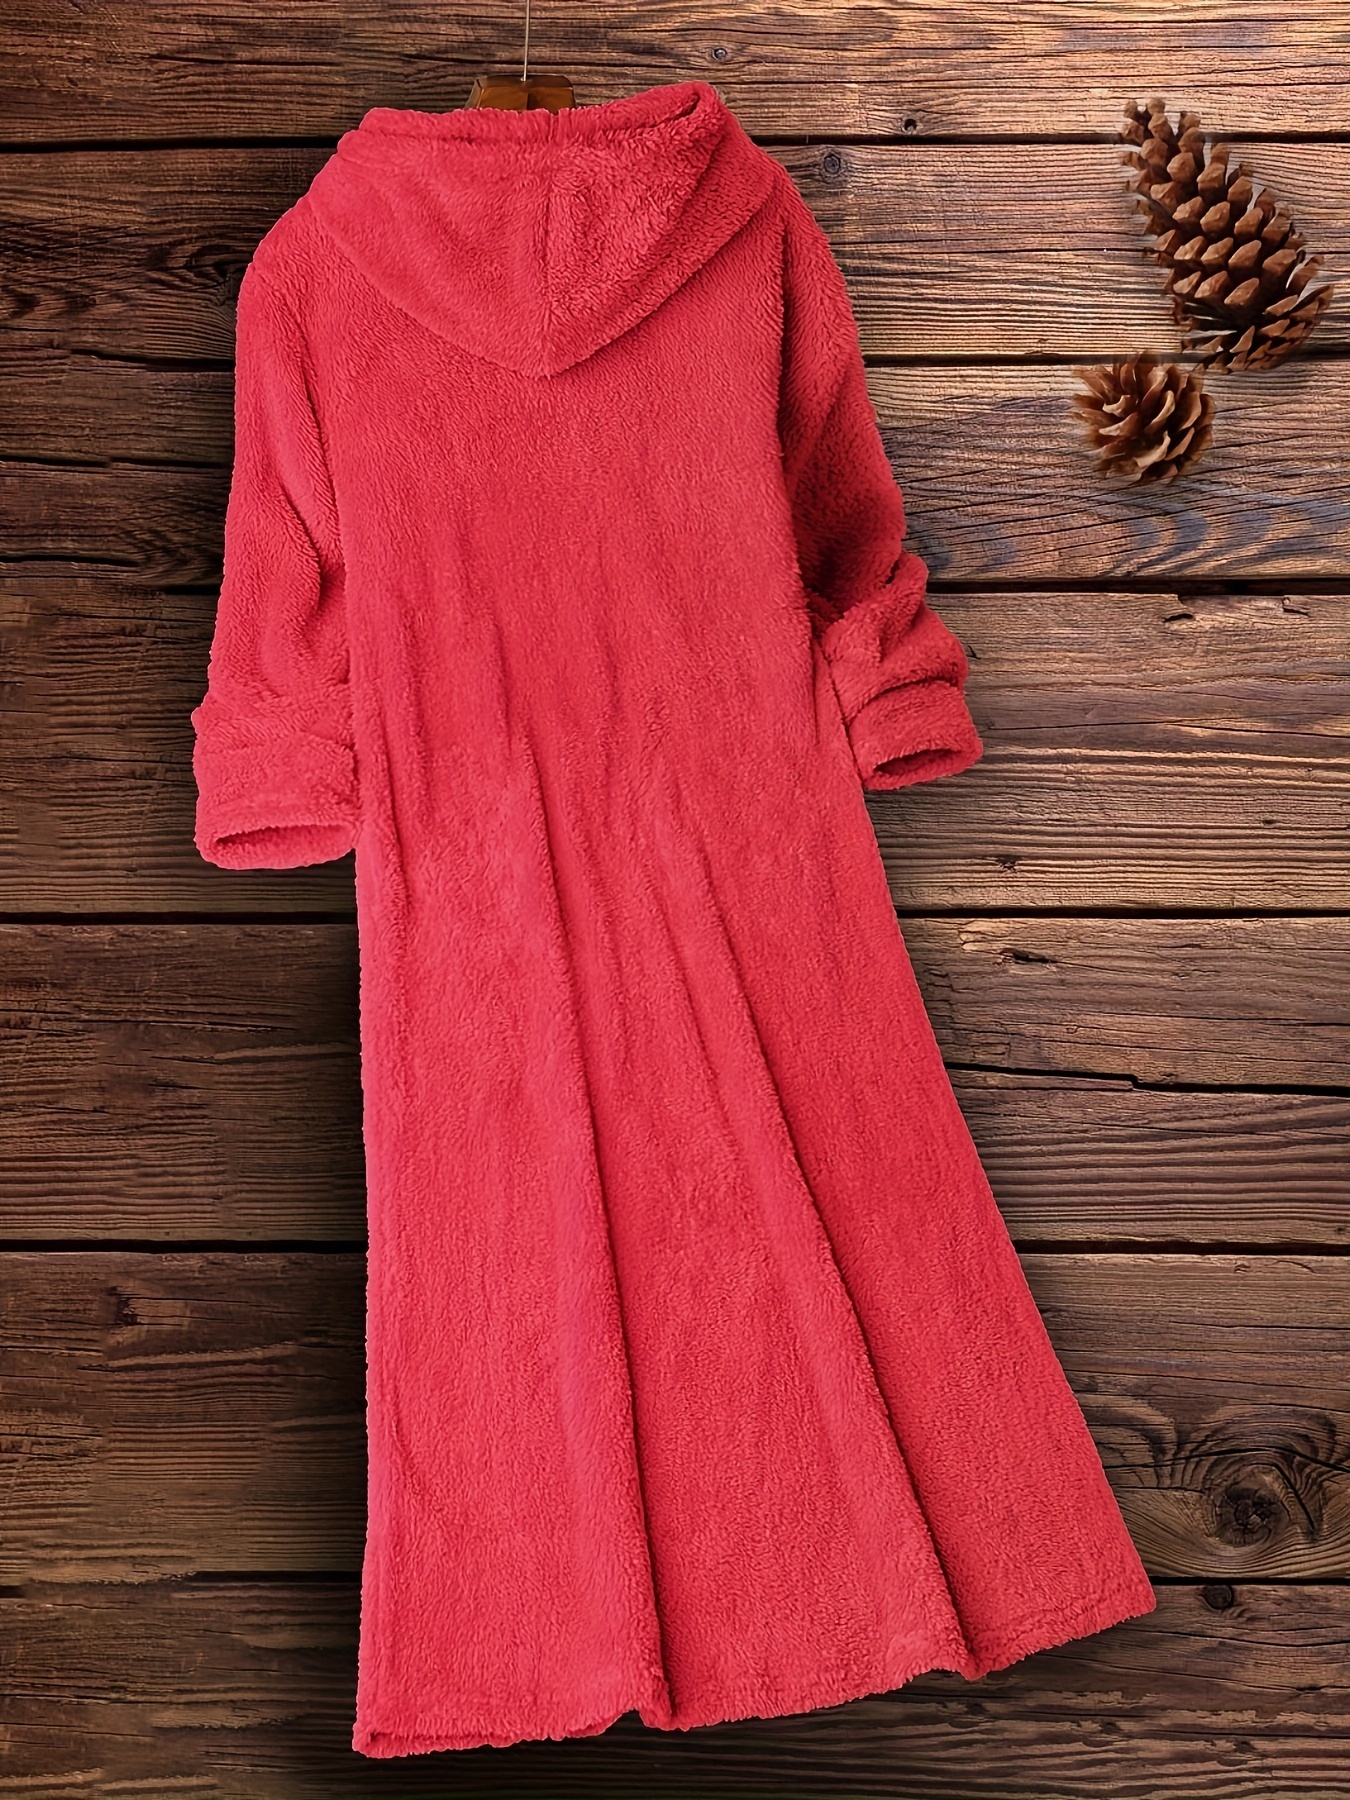 fuzzy hooded midi dress casual pocket front solid long sleeve dress womens clothing details 2